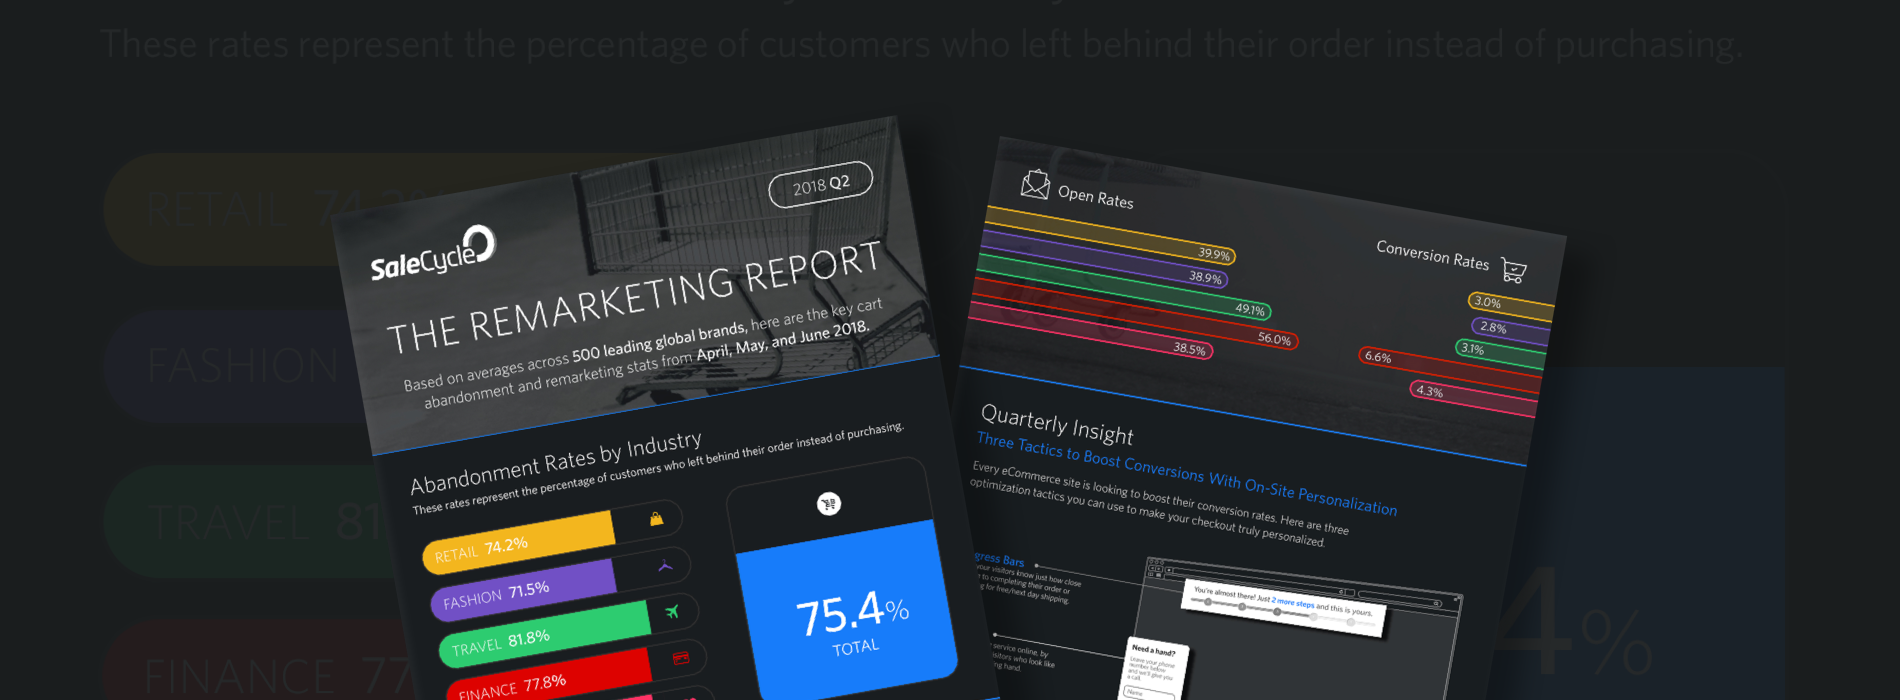 [Infographic] The Remarketing Report – Q2 2018